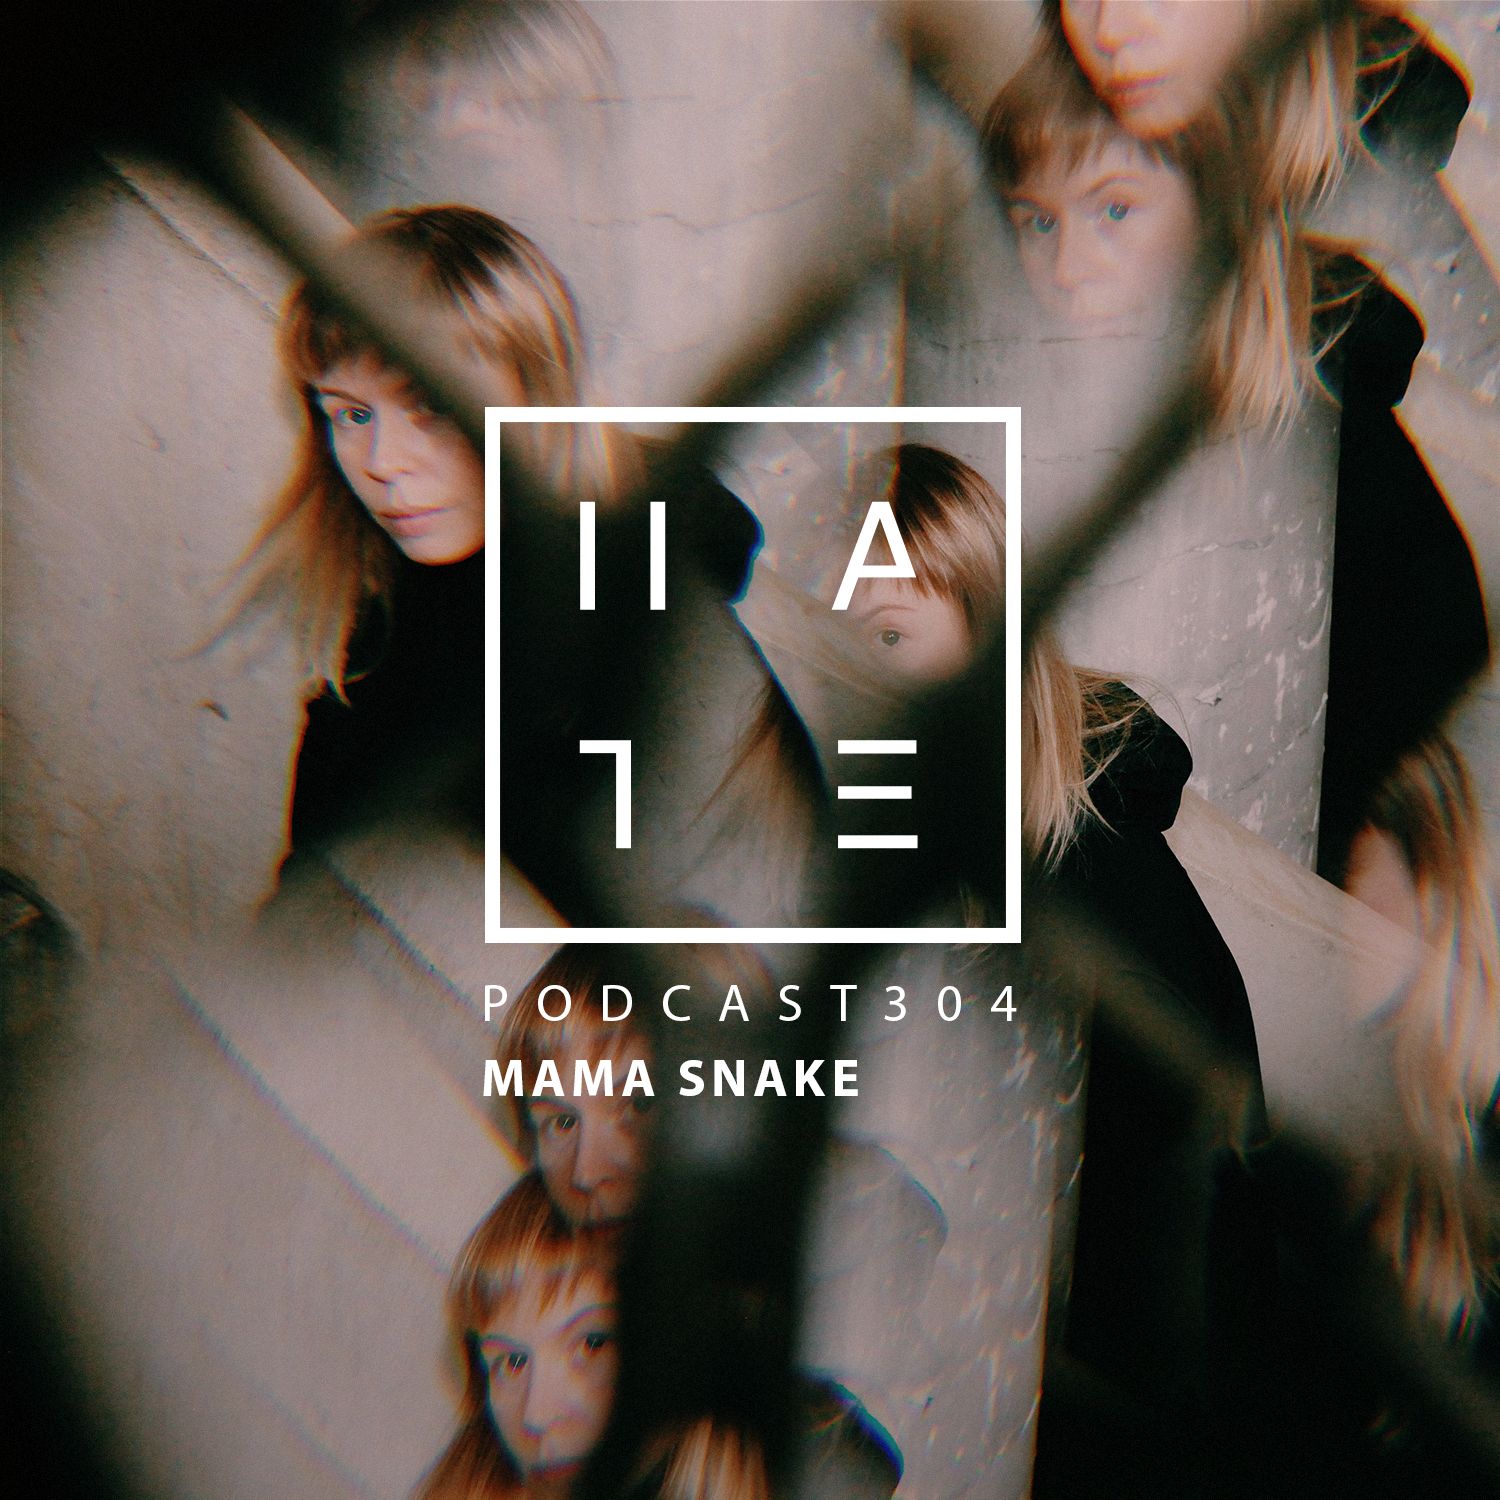 Download Mama Snake - HATE Podcast 304